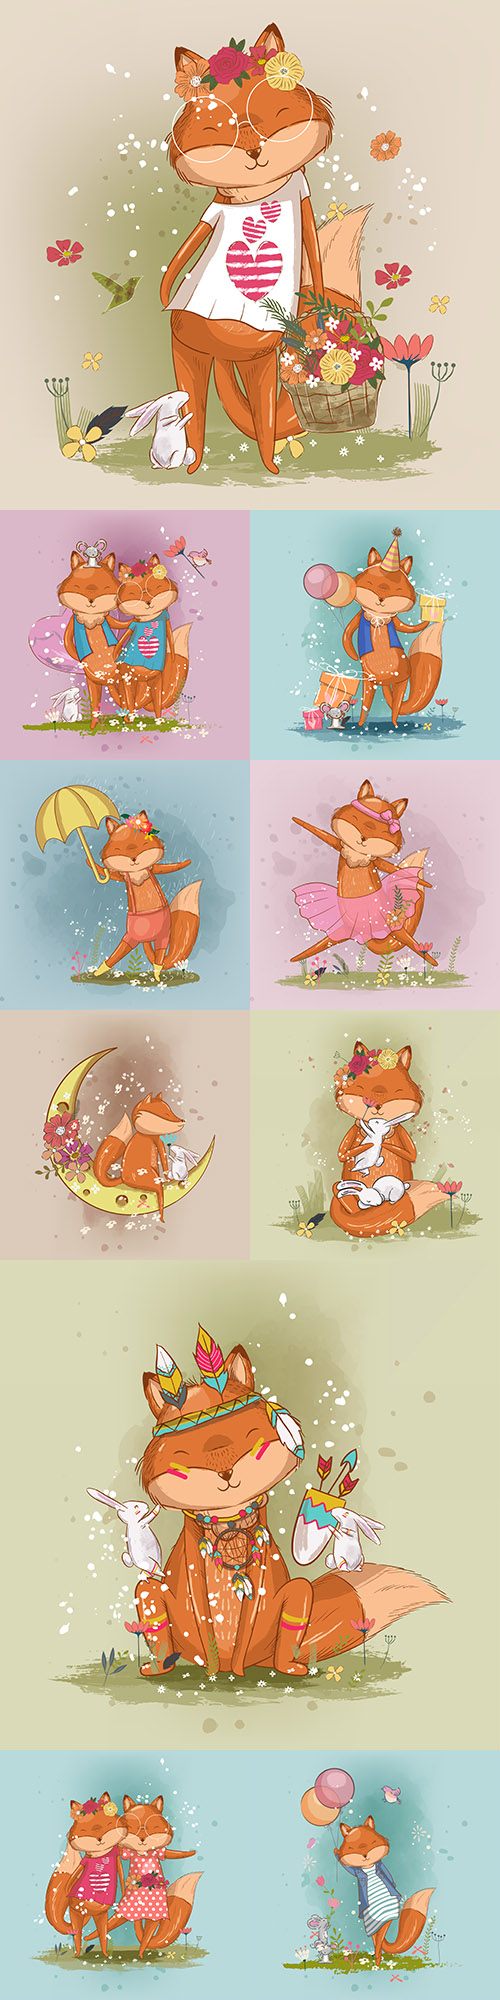 Fox with flowers and bunny drawn ilustrations